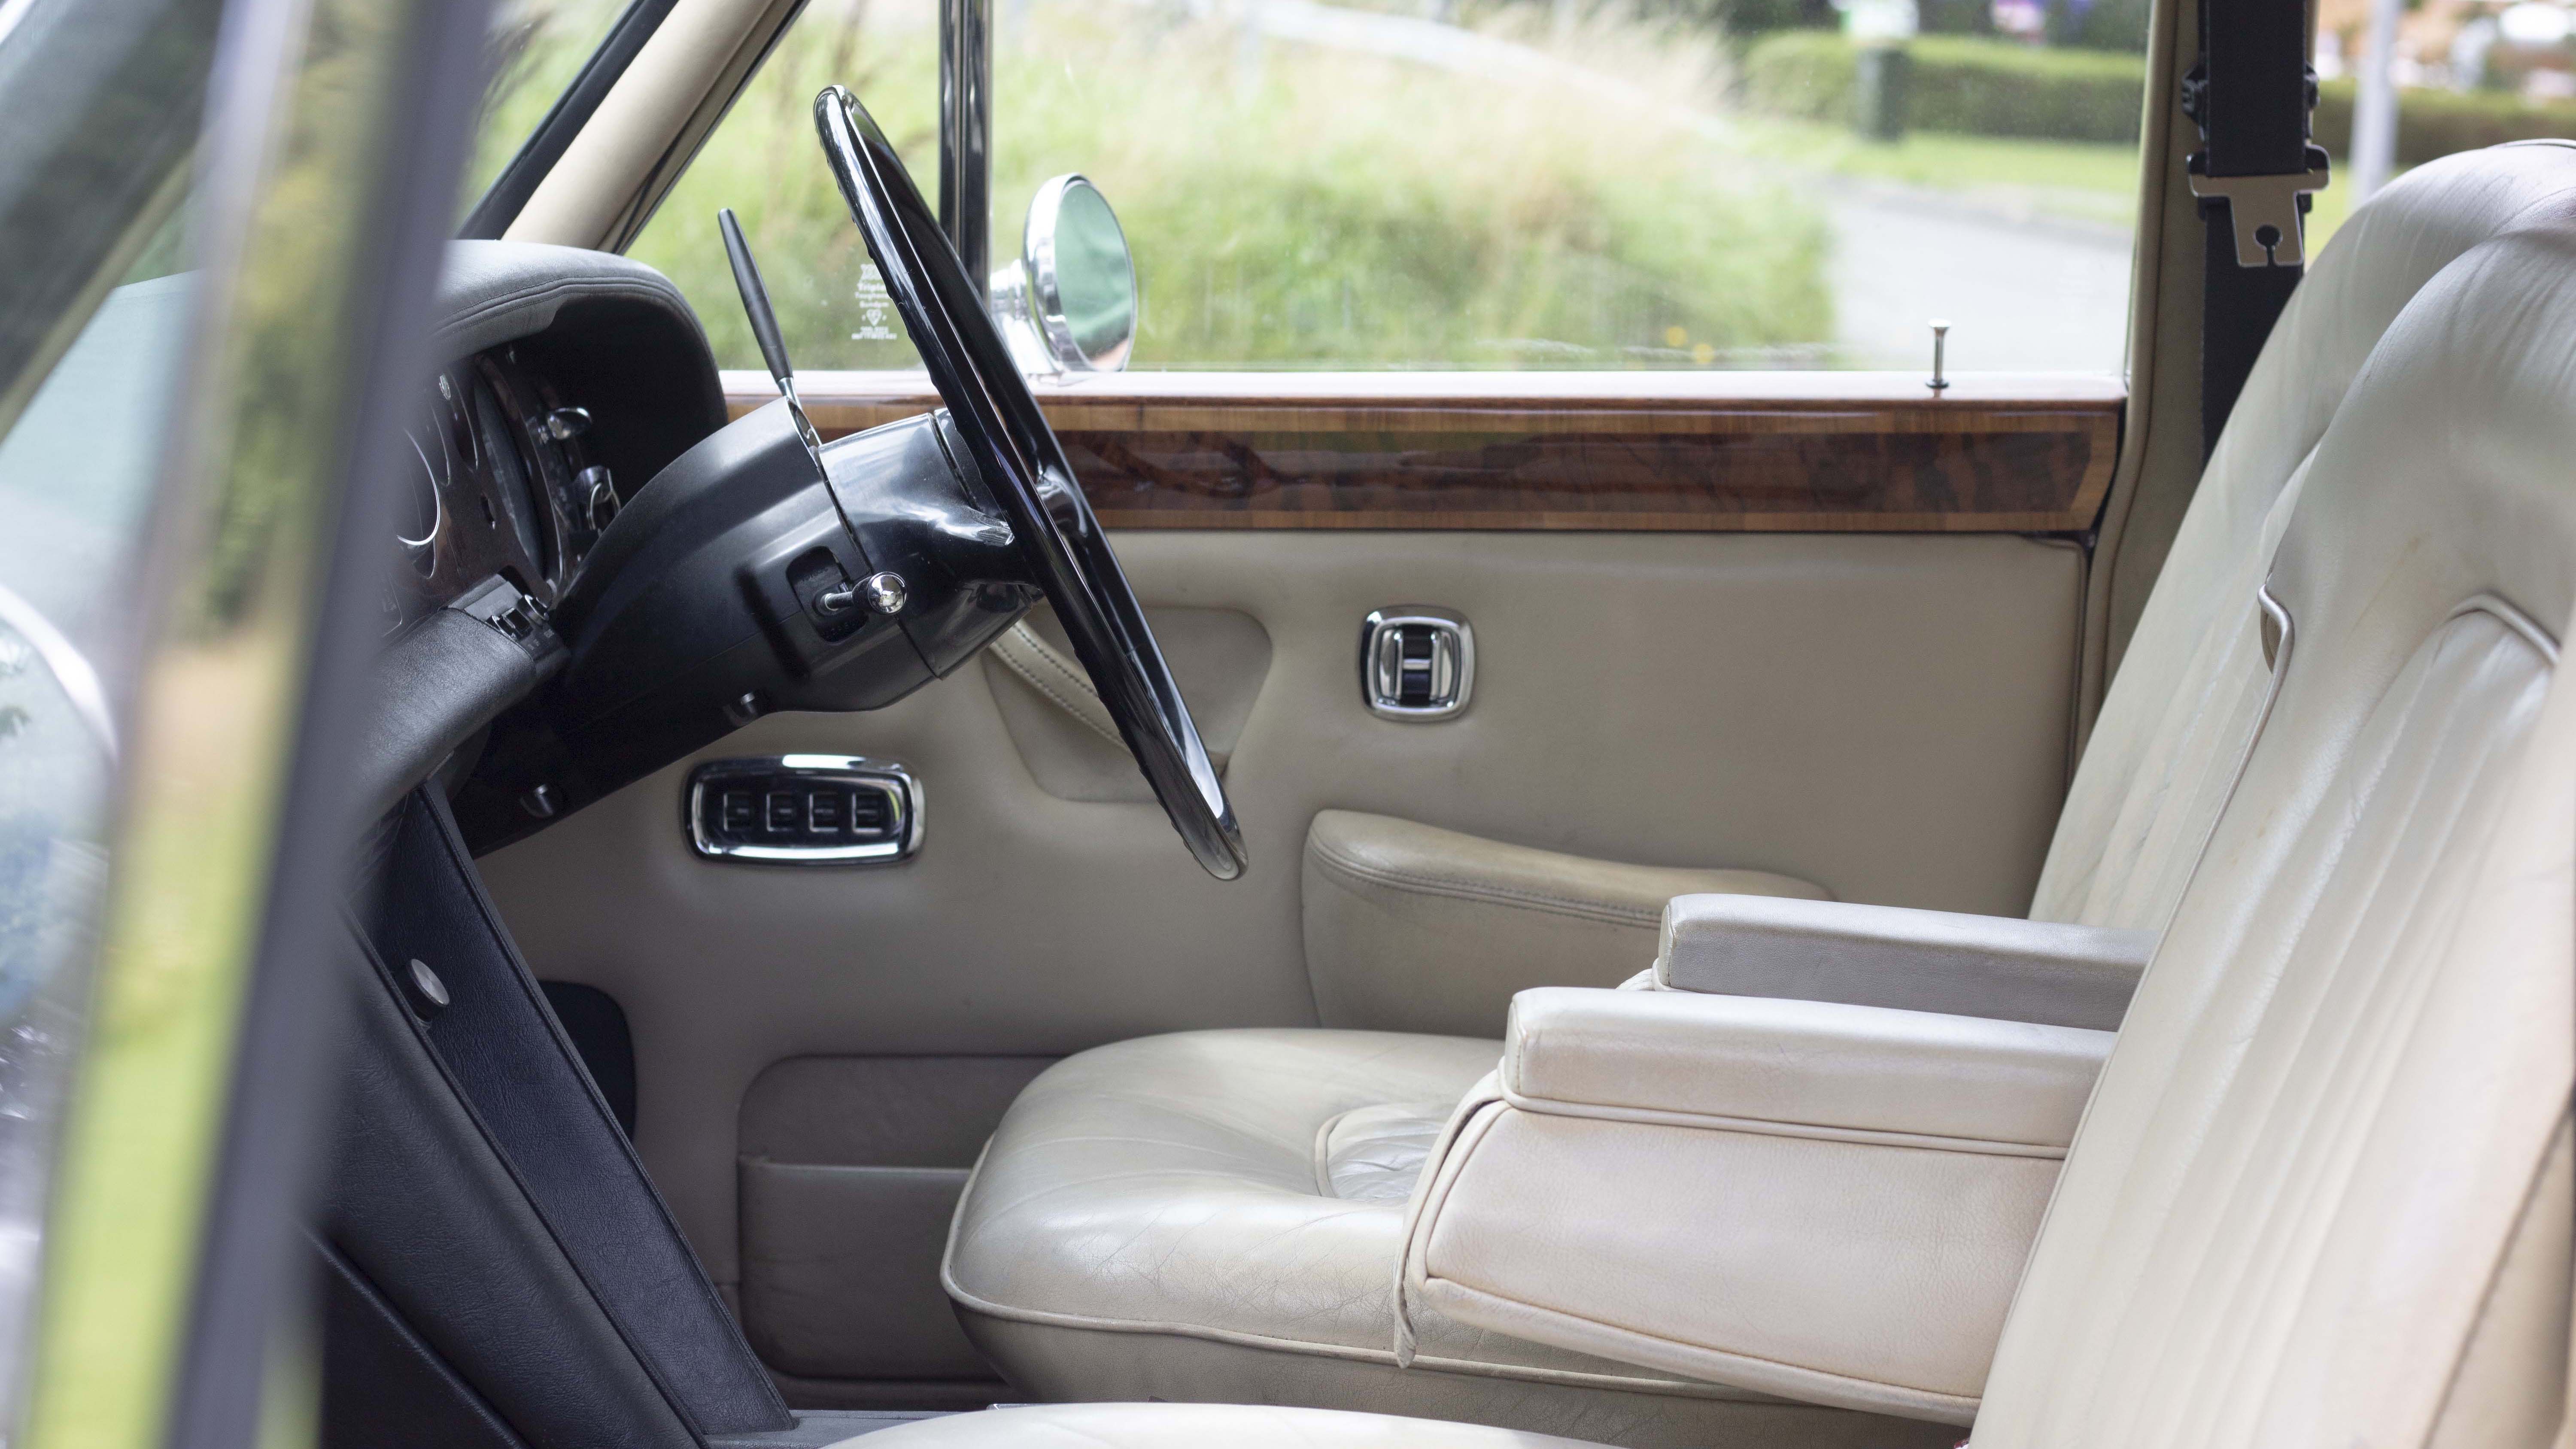 Cream Leather front seats in Classic Rolls-Royce